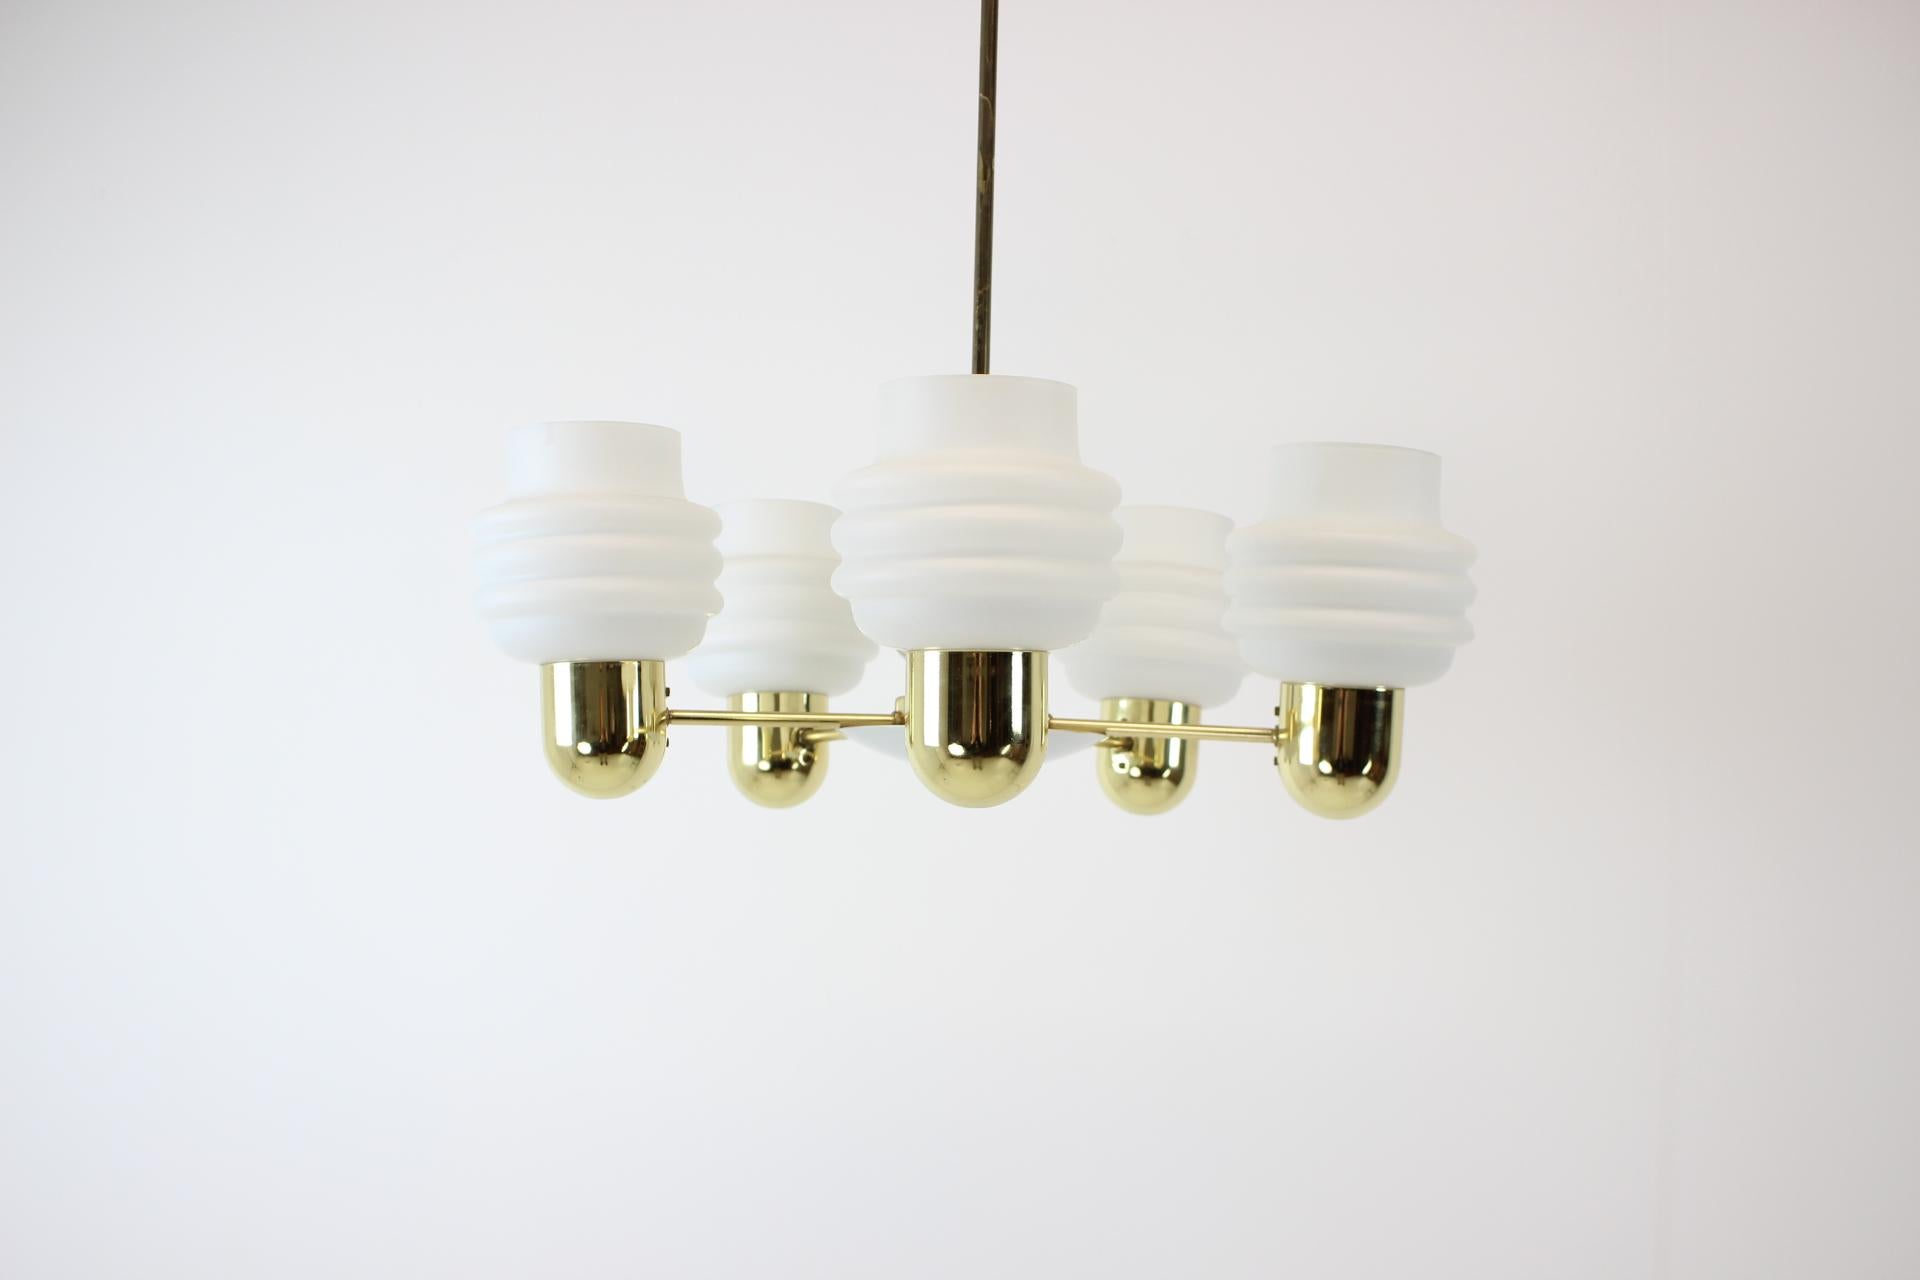 Made in Czechoslovakia
Made of Glass, brass
5x E27 or E26 bulb
Good Original condition
US wiring compatible.